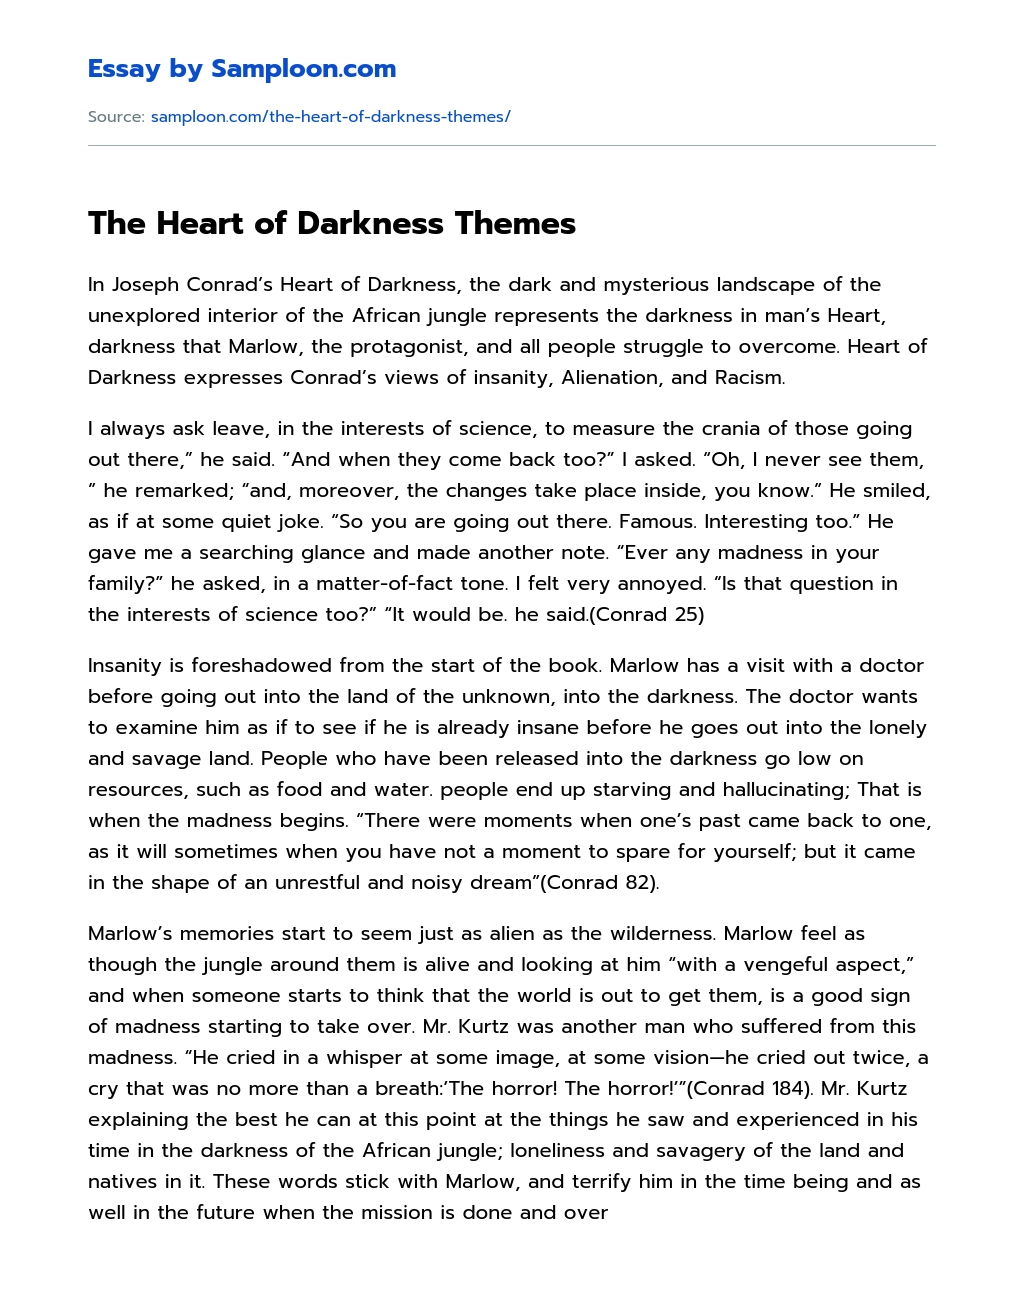 The Heart of Darkness Themes essay